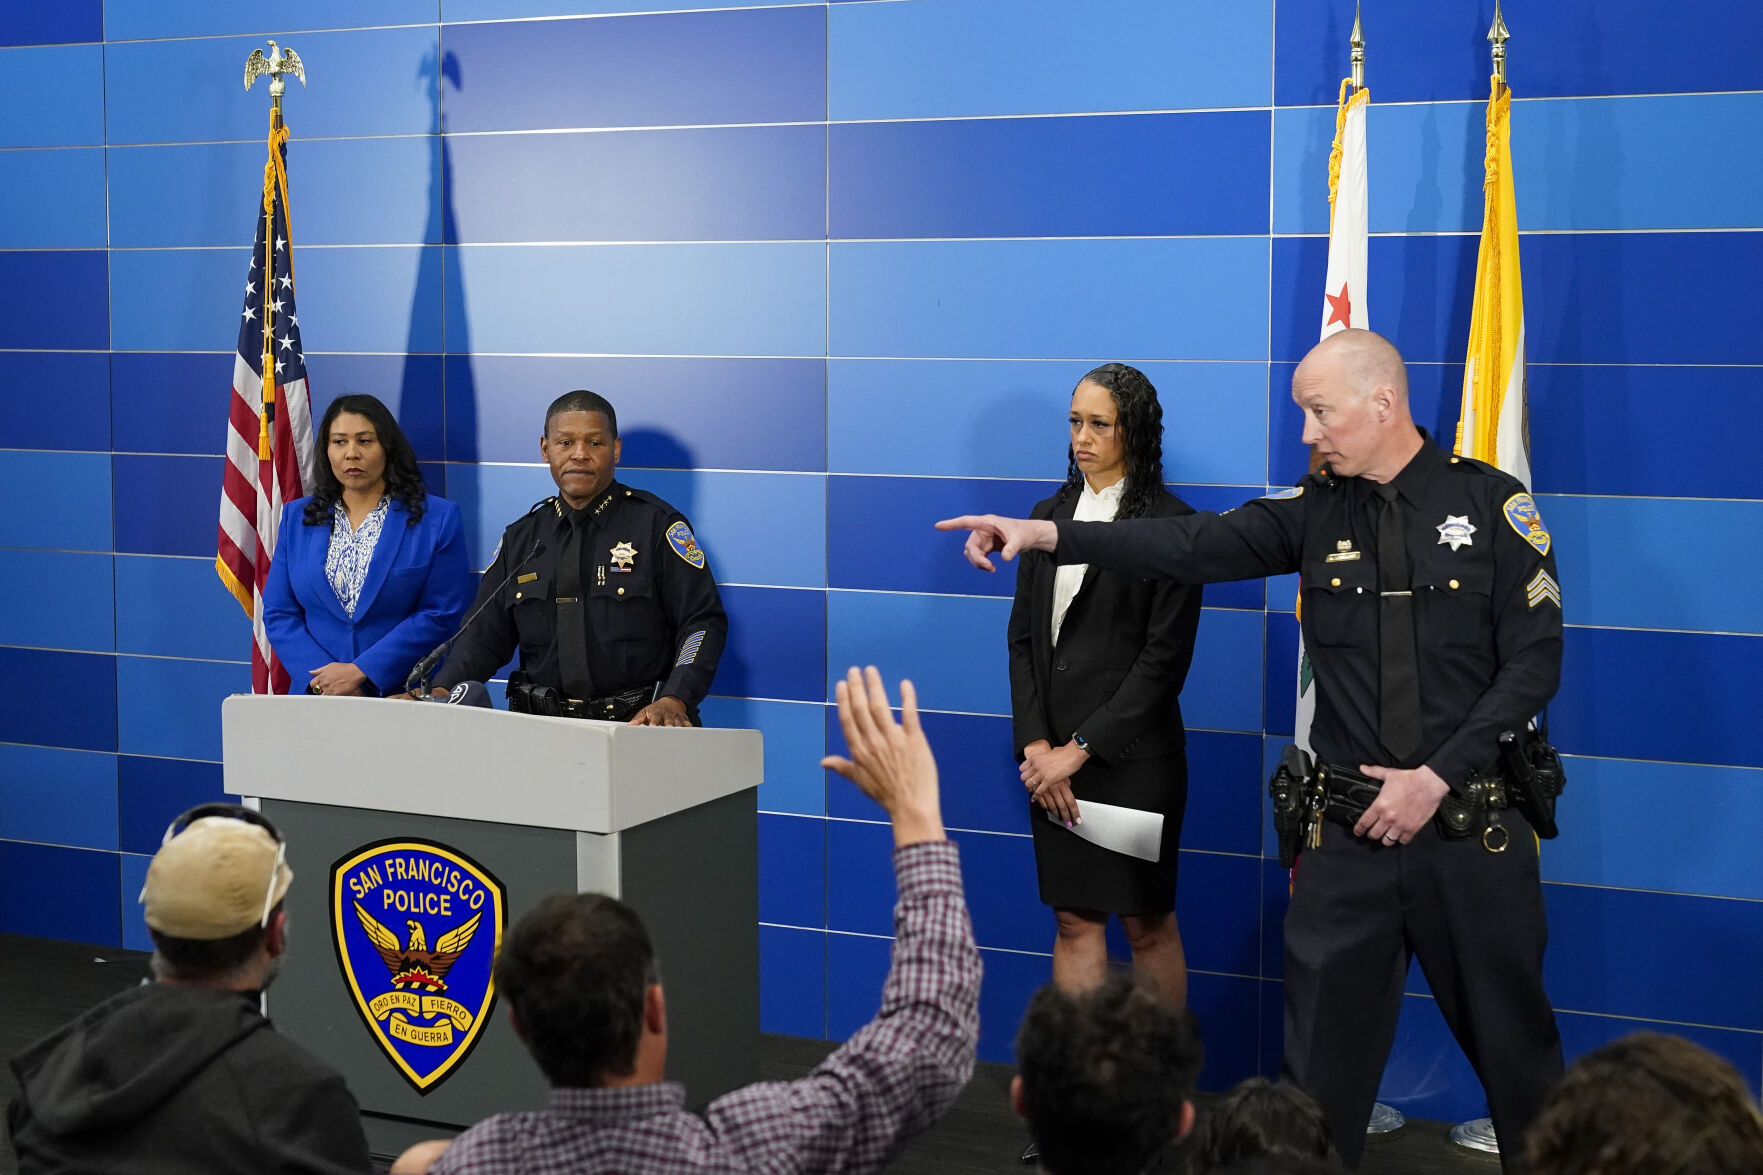 <p>San Francisco Police Chief William Scott, second from left, answers questions from reporters during a press conference where officials announced the arrest of a suspect in the homicide investigation of Robert Lee, Thursday, April 13, 2023, in San Francisco. (AP Photo/Godofredo A. Vásquez)</p>   PHOTO CREDIT: Godofredo A. V·squez - staff, AP